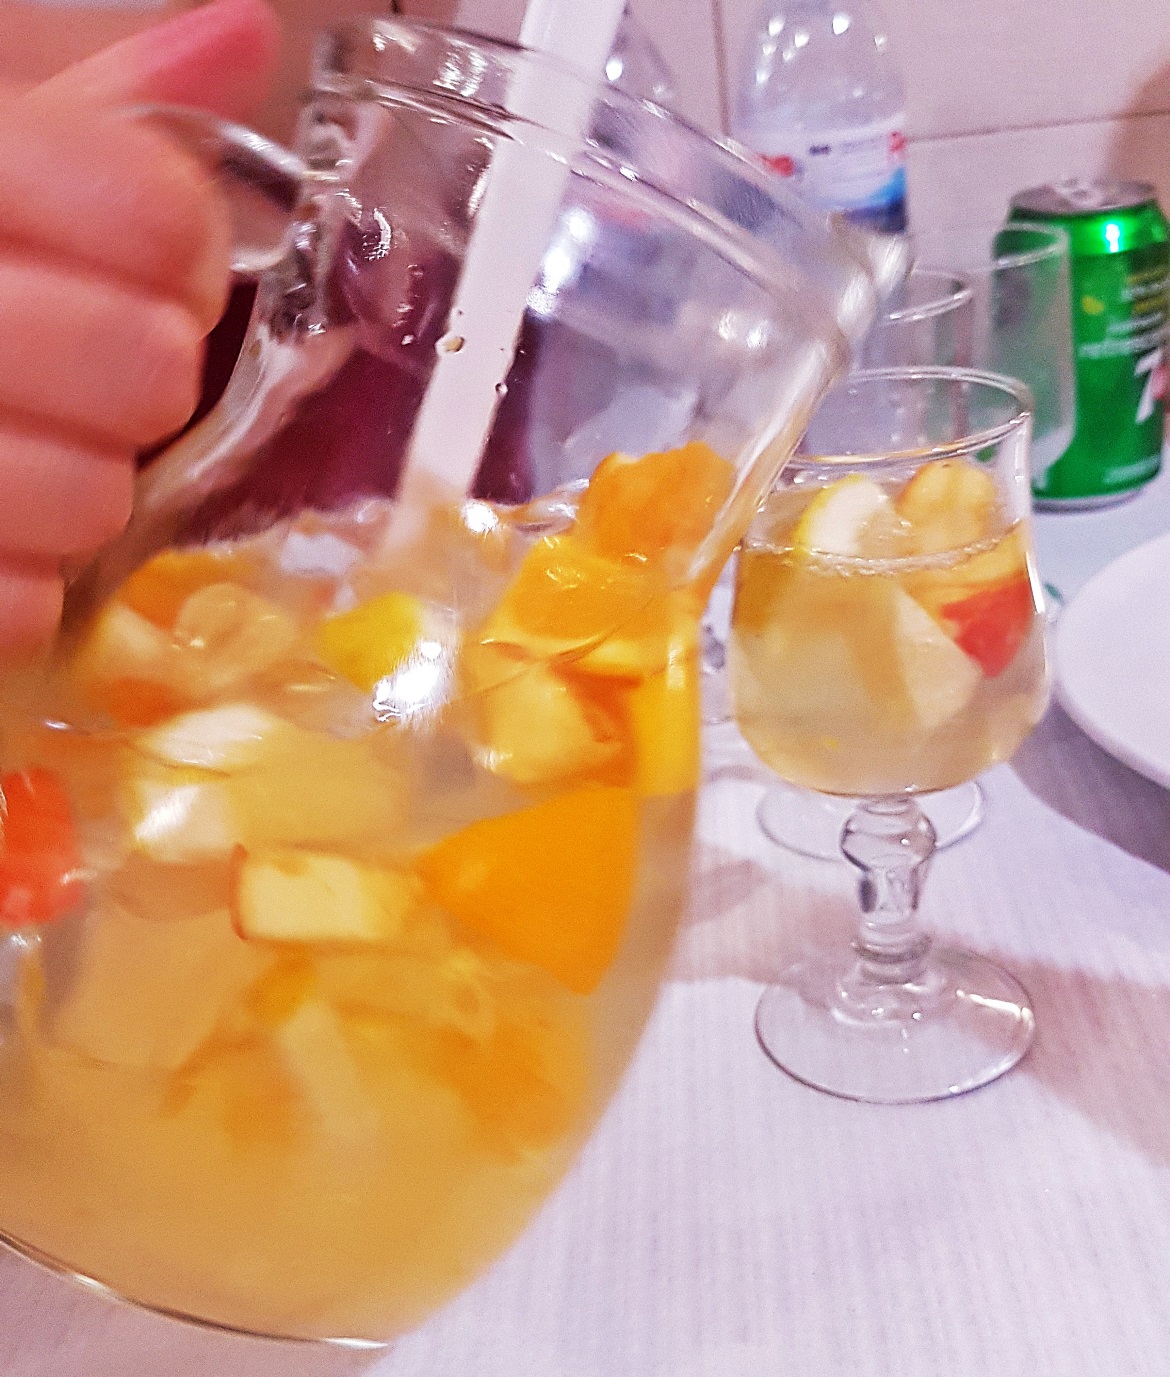 White sangria at Restaurant de Calçada - Food and Drink in Lisbon, review by BeckyBecky Blogs